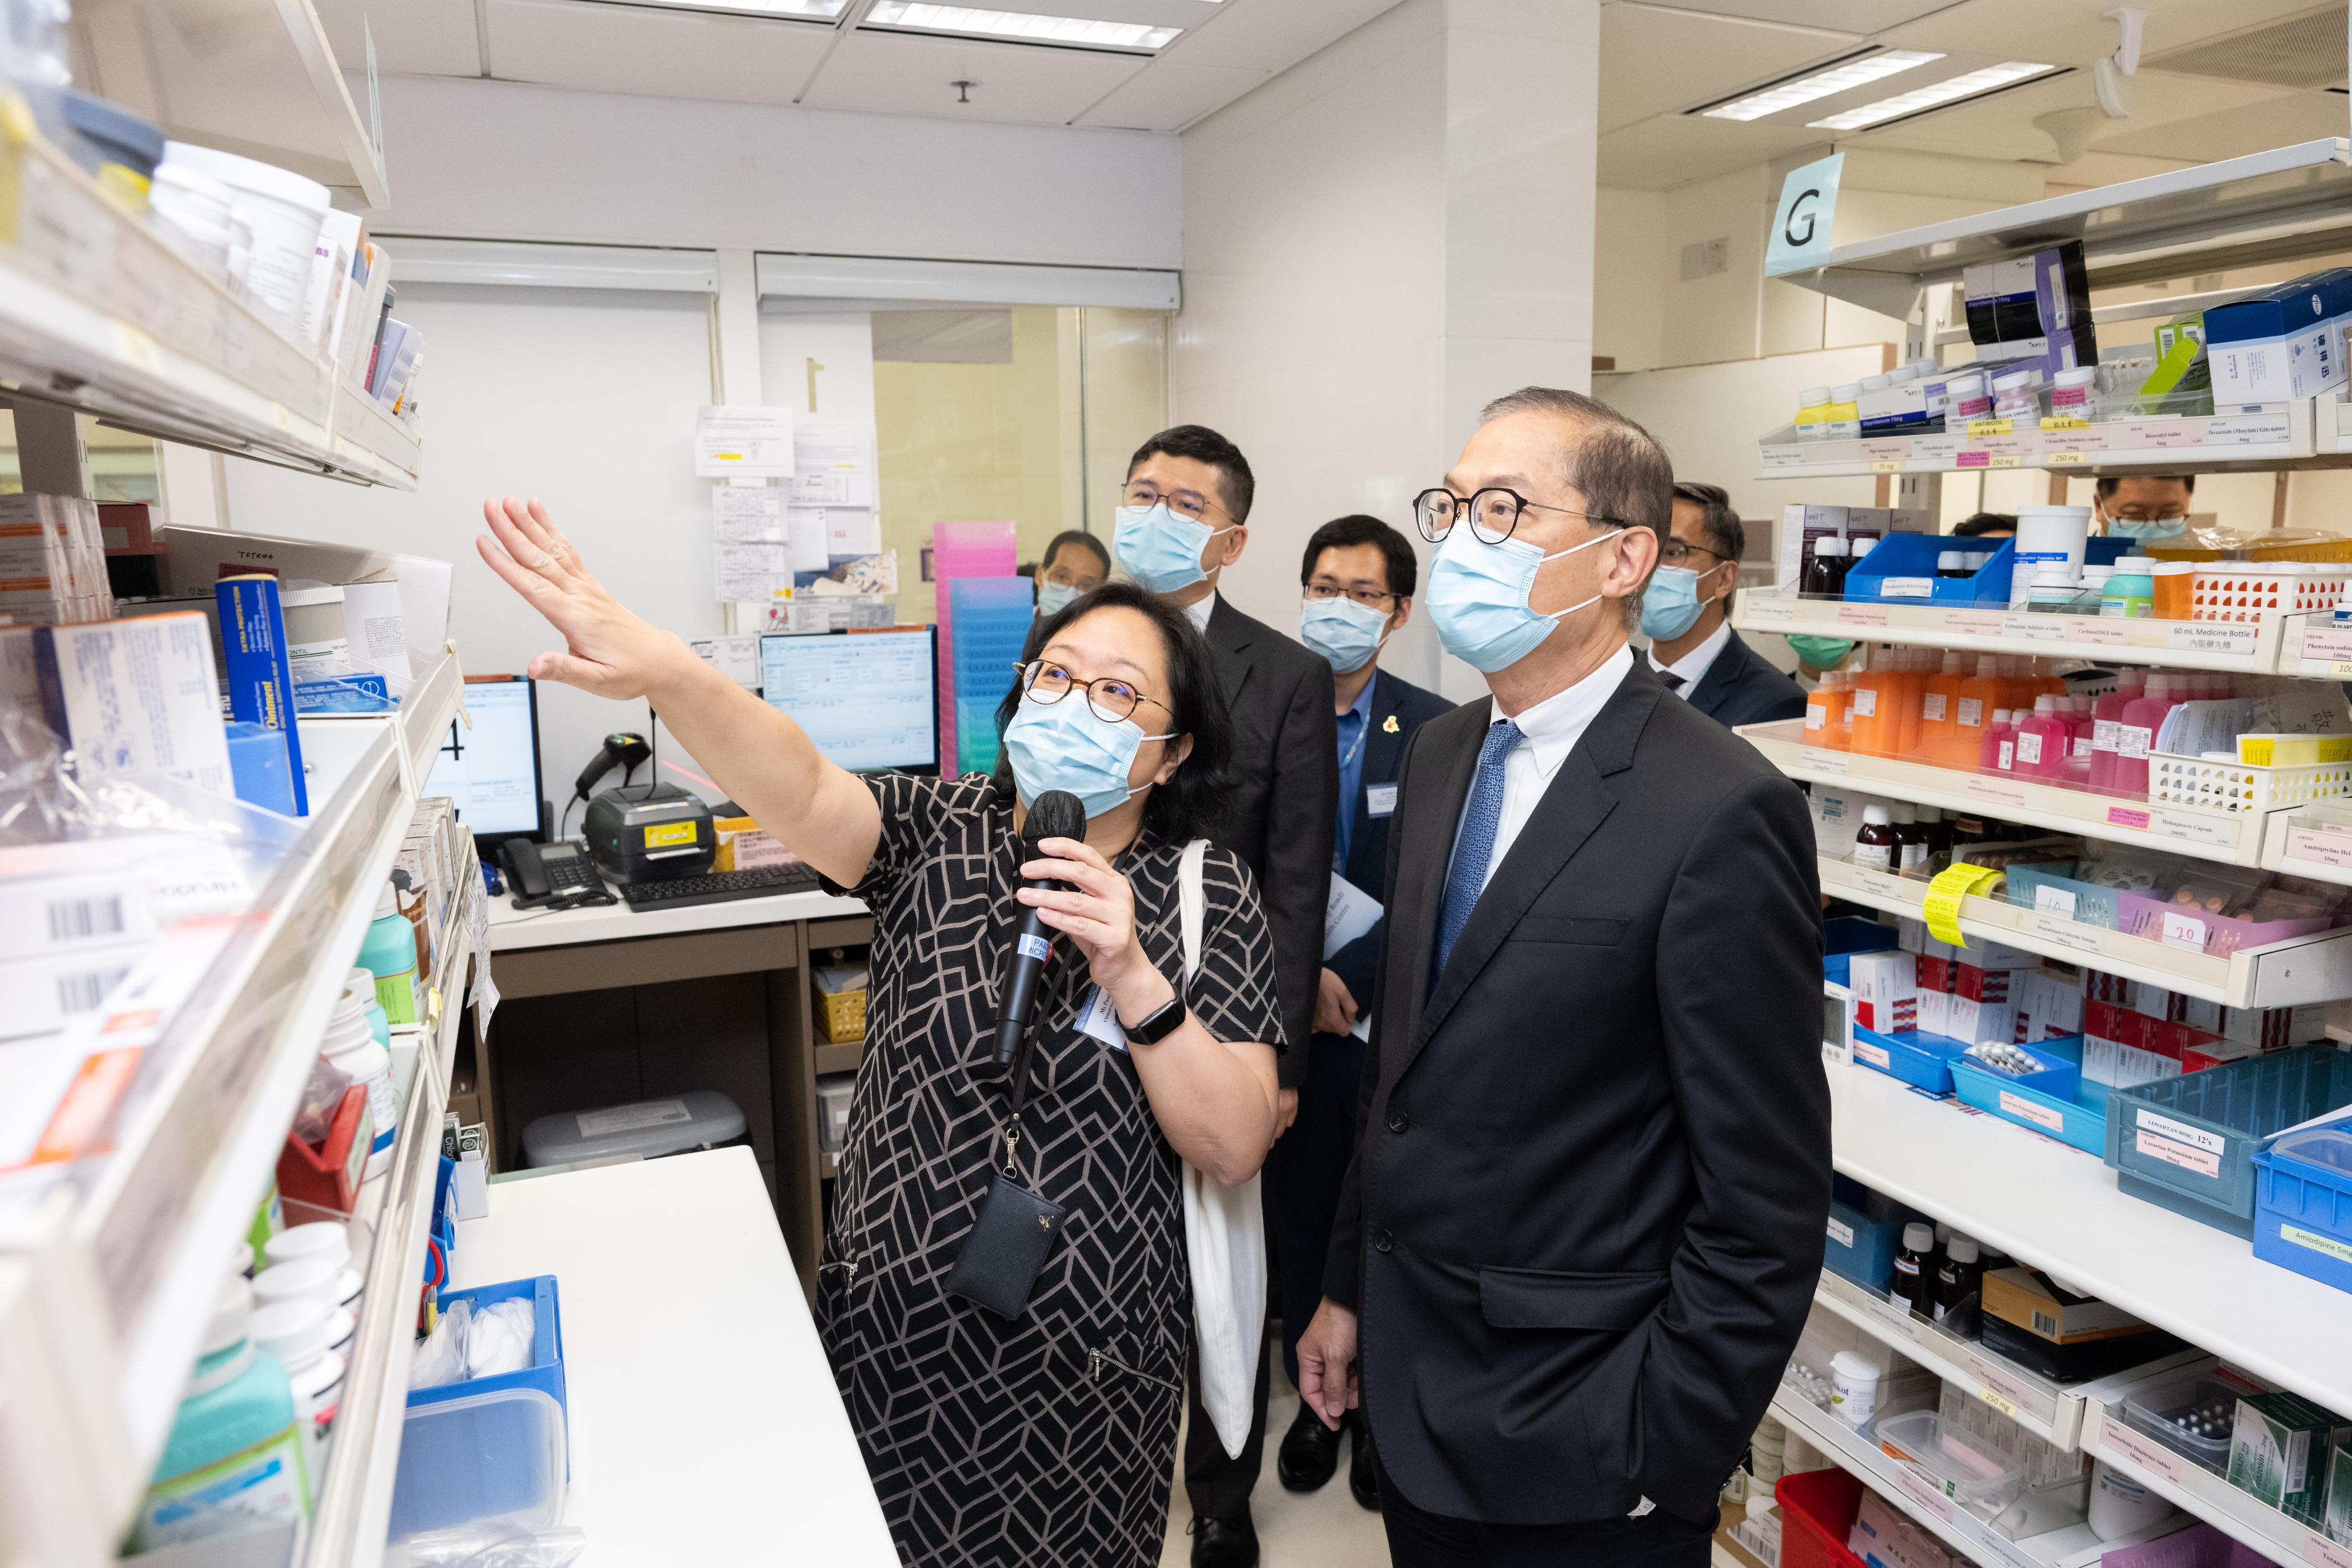 The Secretary for Health, Professor Lo Chung-mau (right), visits the Tin Shui Wai (Tin Yip Road) Community Health Centre today (July 20) and tours the pharmacy of the Centre to get a better understanding of the pharmaceutical services available at the Centre.